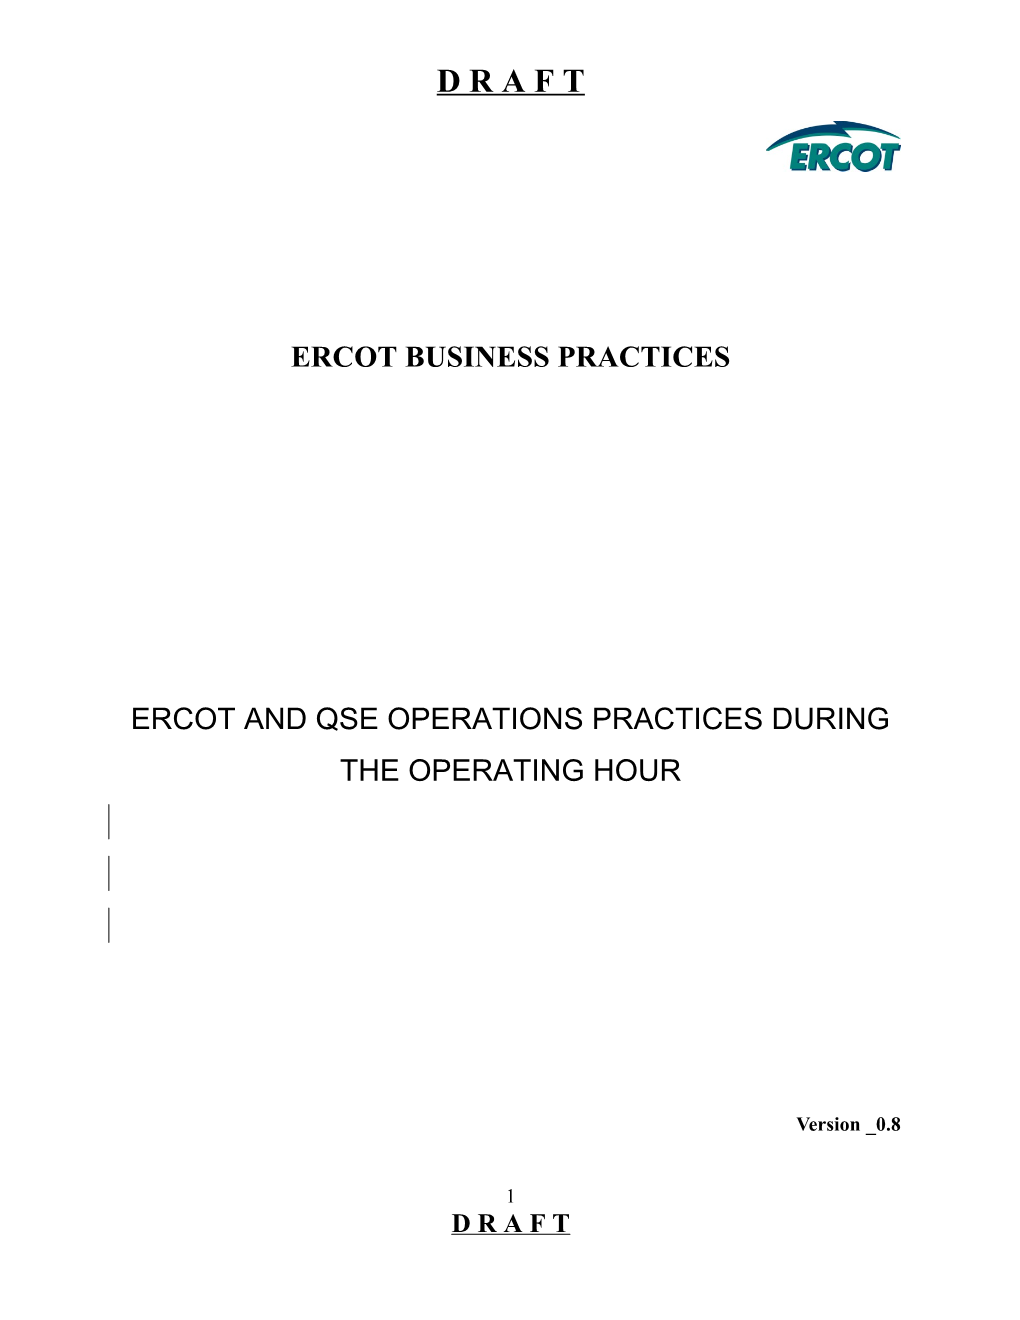 Ercot and Qse Operations Practices During the Operating Hour